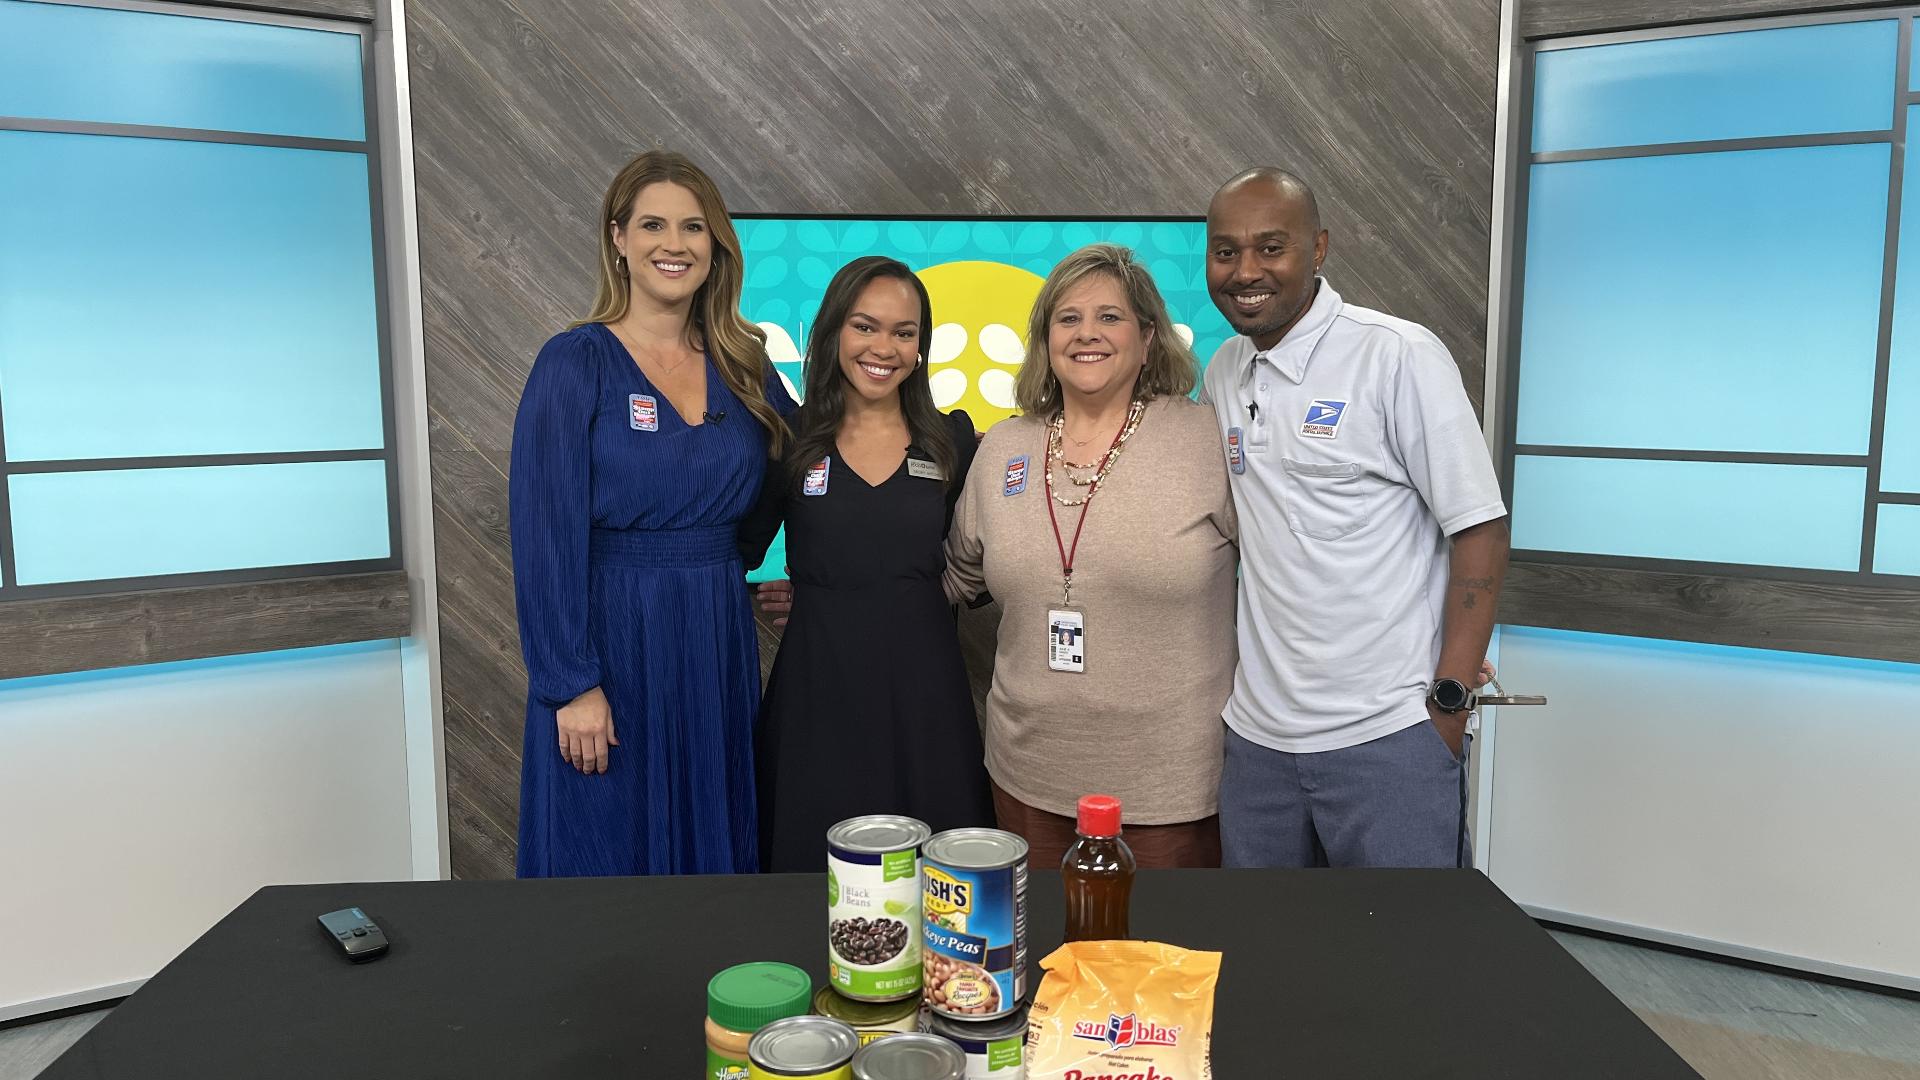 Ebony Mitchell and Ferlando Smith explain how easy people can donate non-perishable goods starting this Saturday for this nationwide campaign.